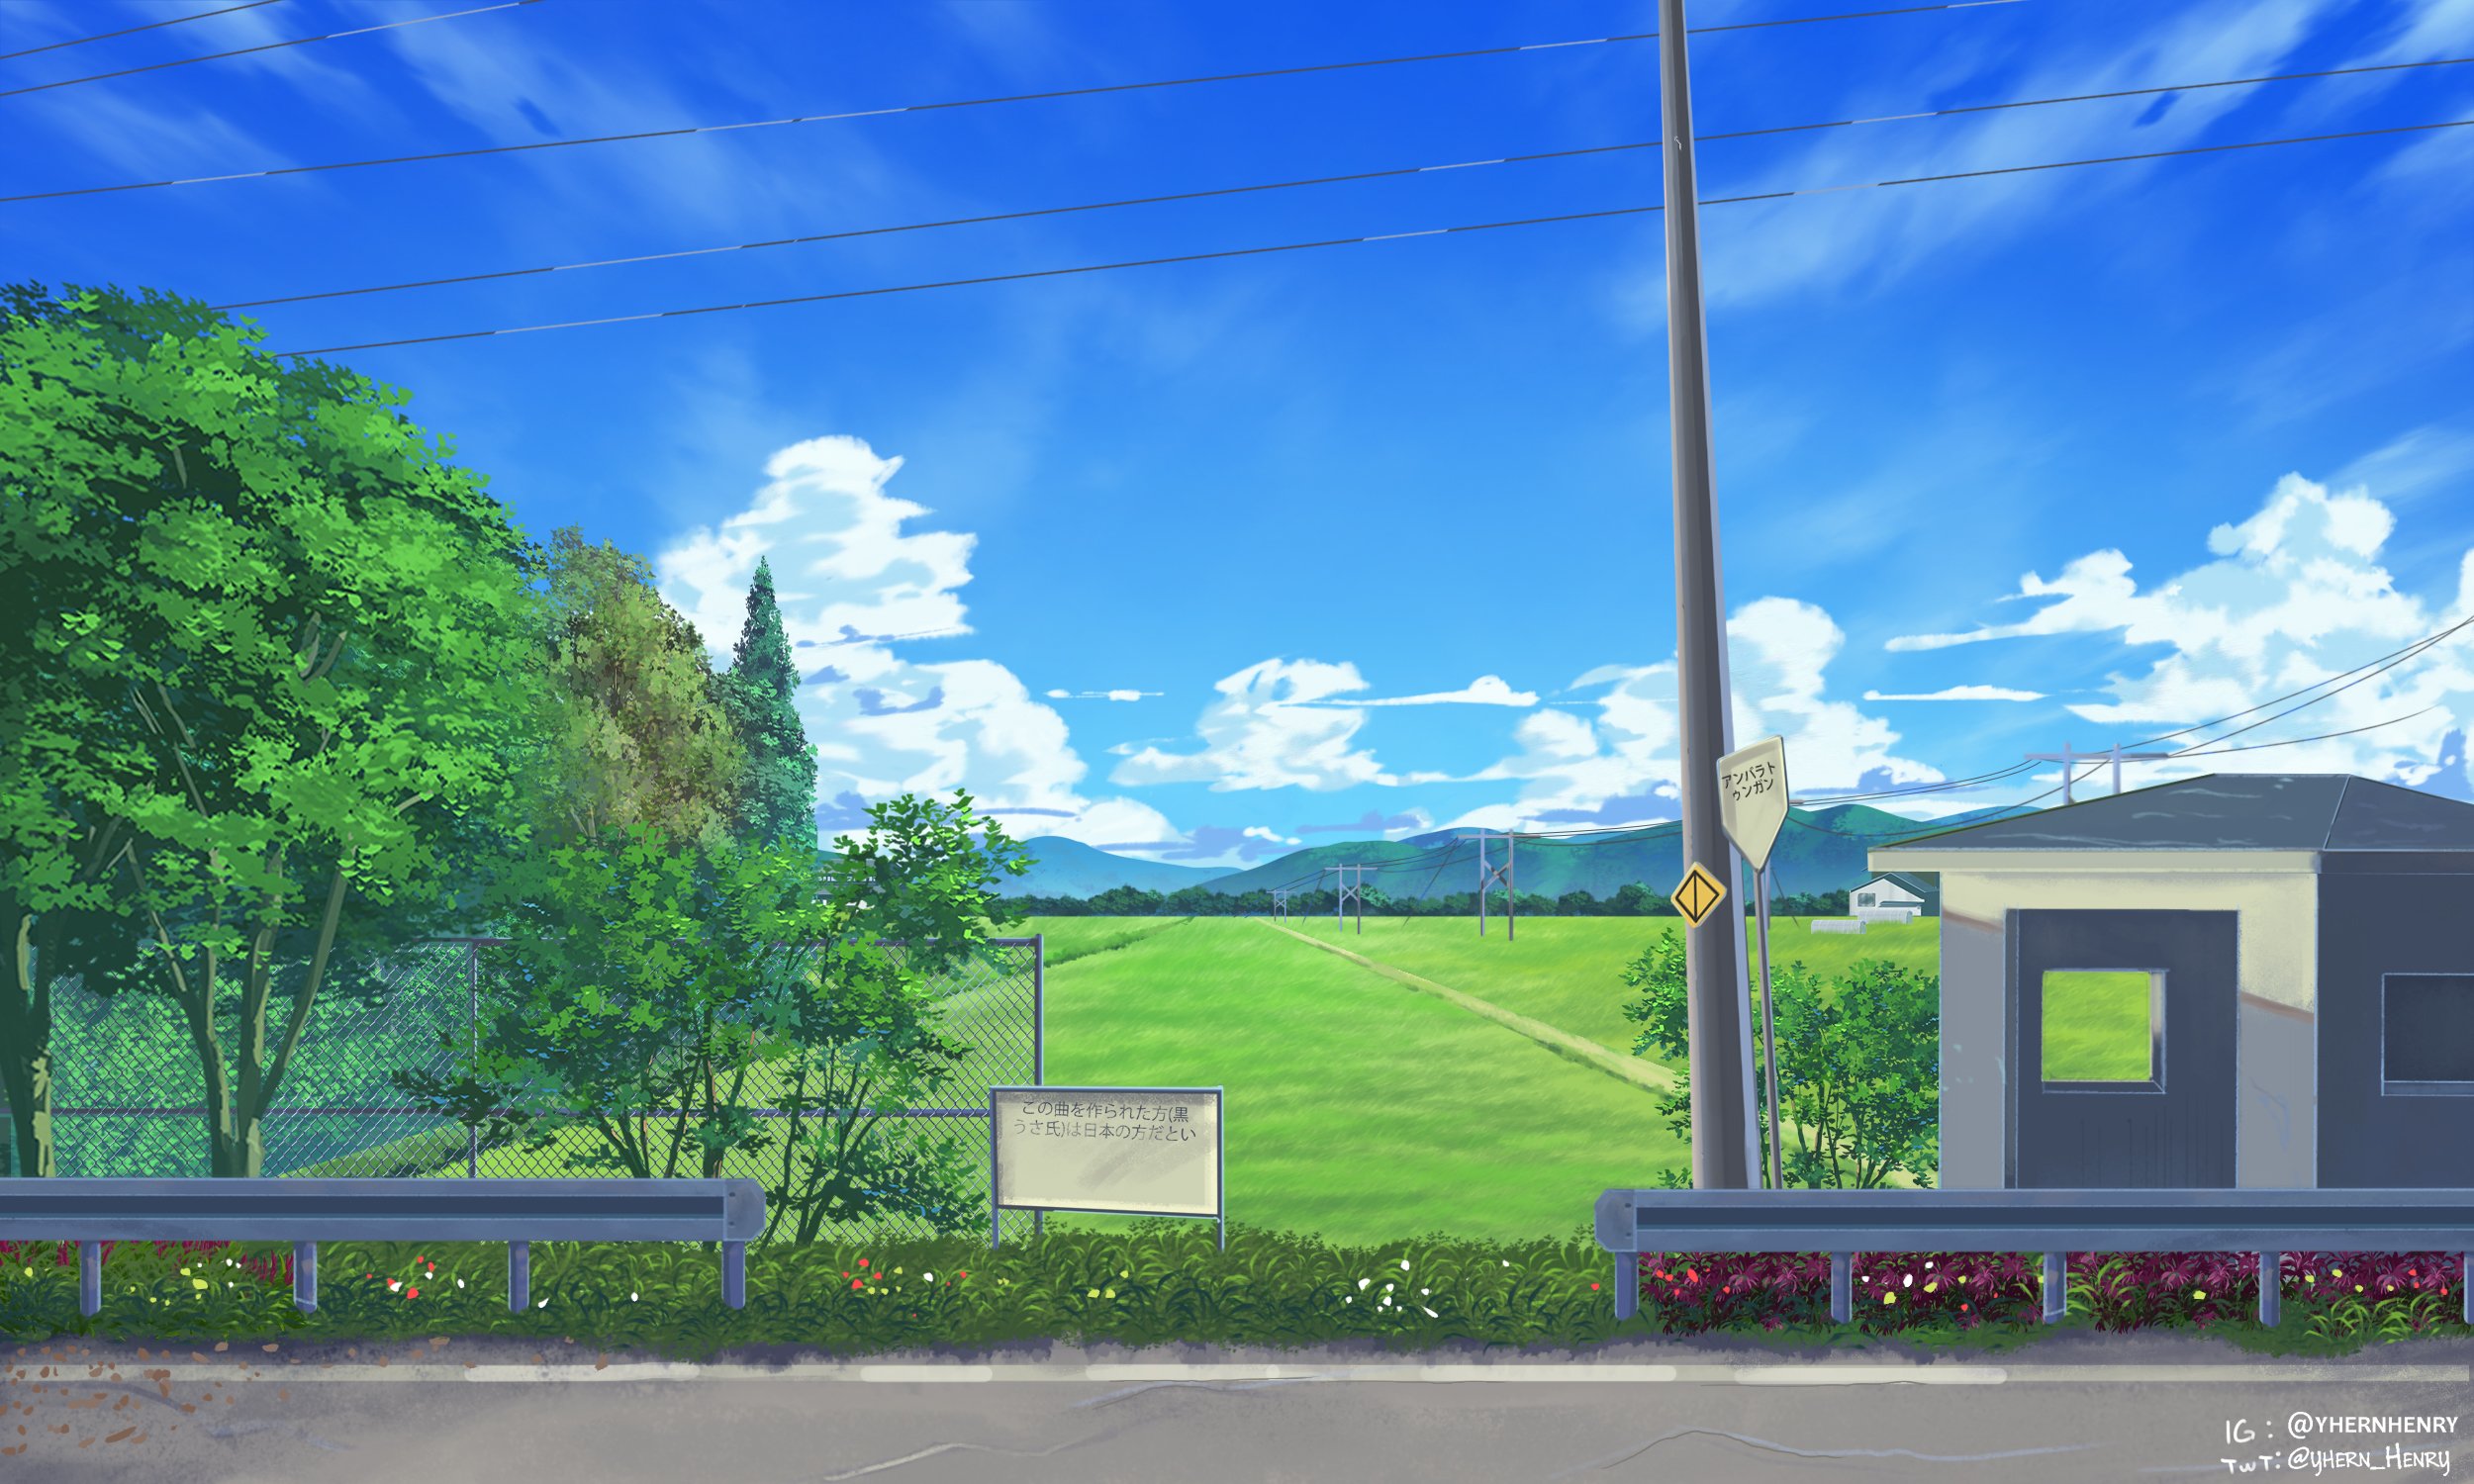 Yhern on for hire wallpaper calm anime background nature art environment art concept landscape price starts at usd anime calm animebackground environment art painting scenery landscape httpstcopspewtf